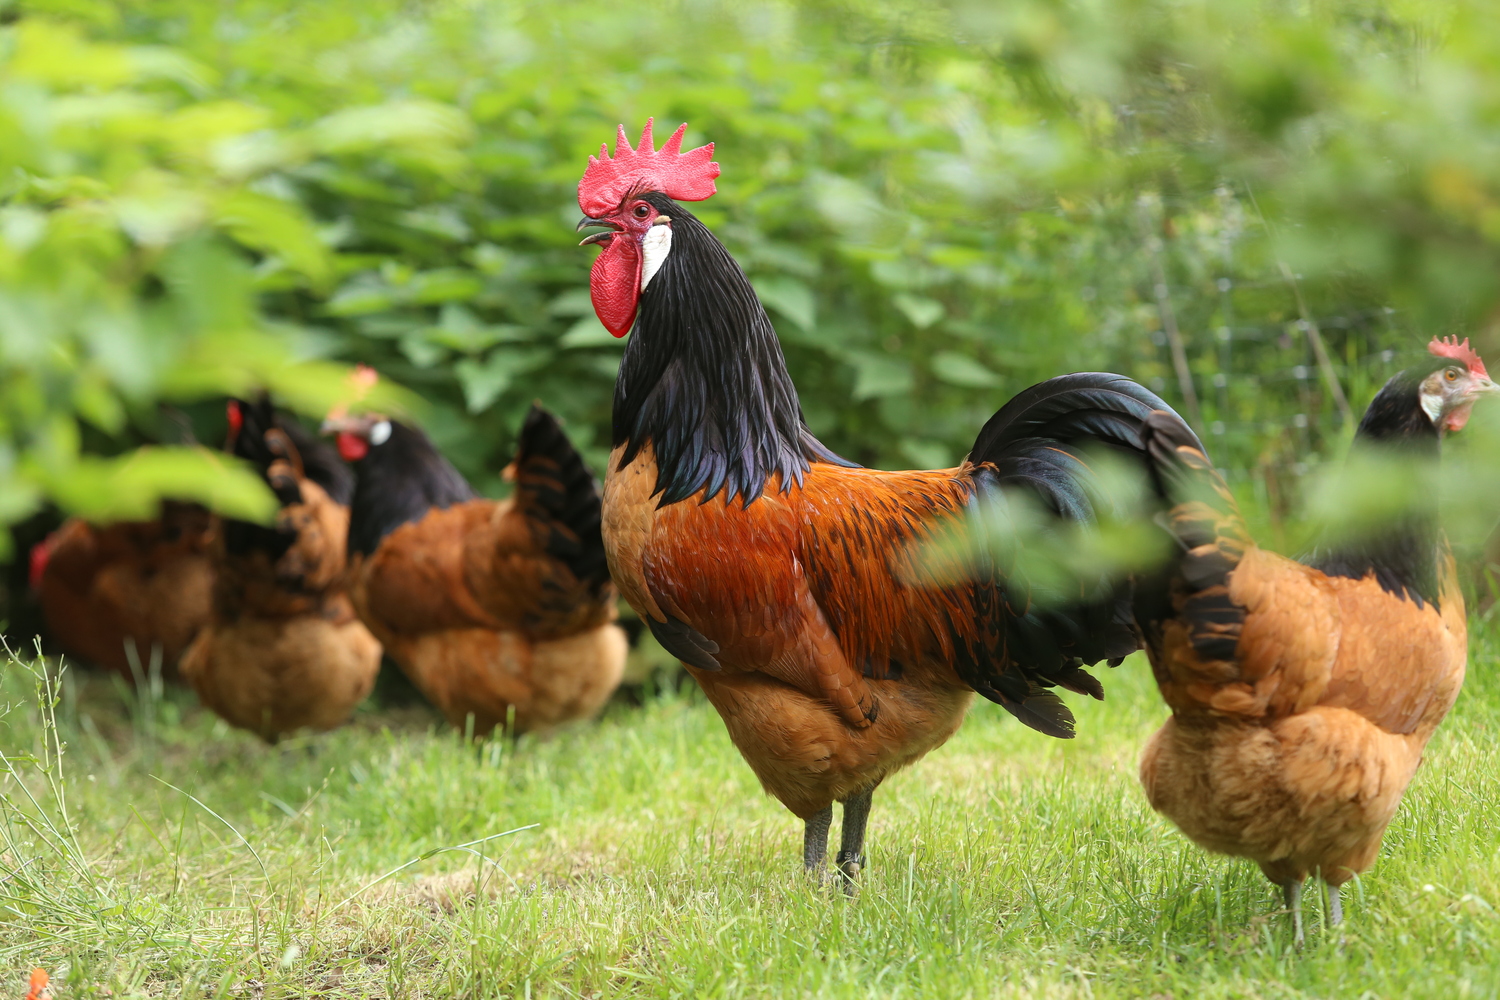 Cockerel and hens from the Vorwerkhuhn breed, which is a traditional German dual-purpose breed (suitable for both meat and egg-laying)